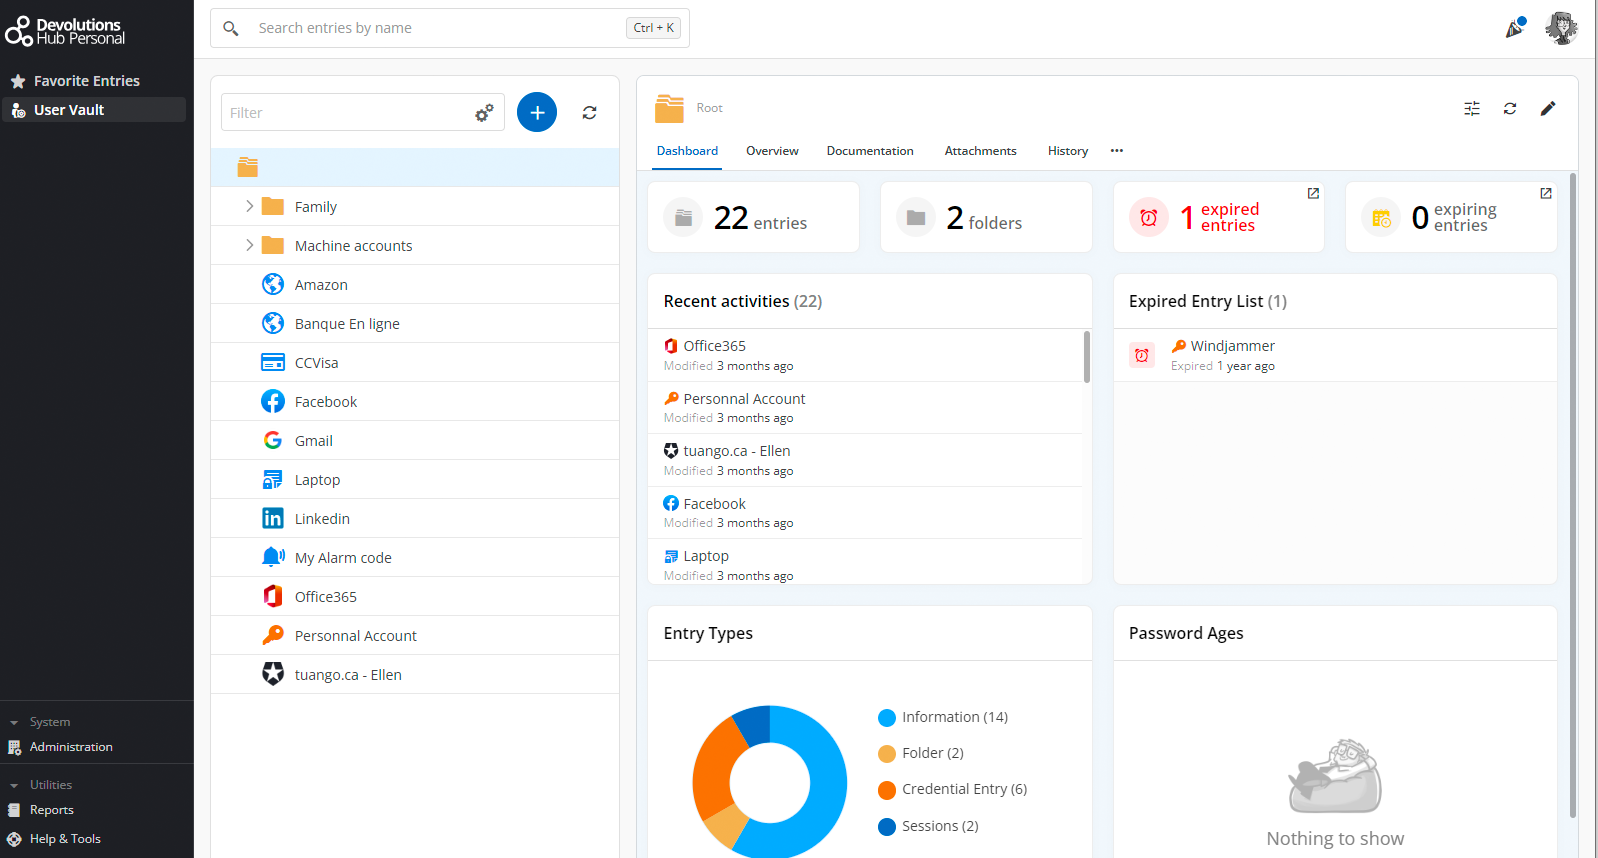 Quickly Organize all your Personal Passwords and Sensitive Data in a Personal Vault - Devolutions Hub Personal